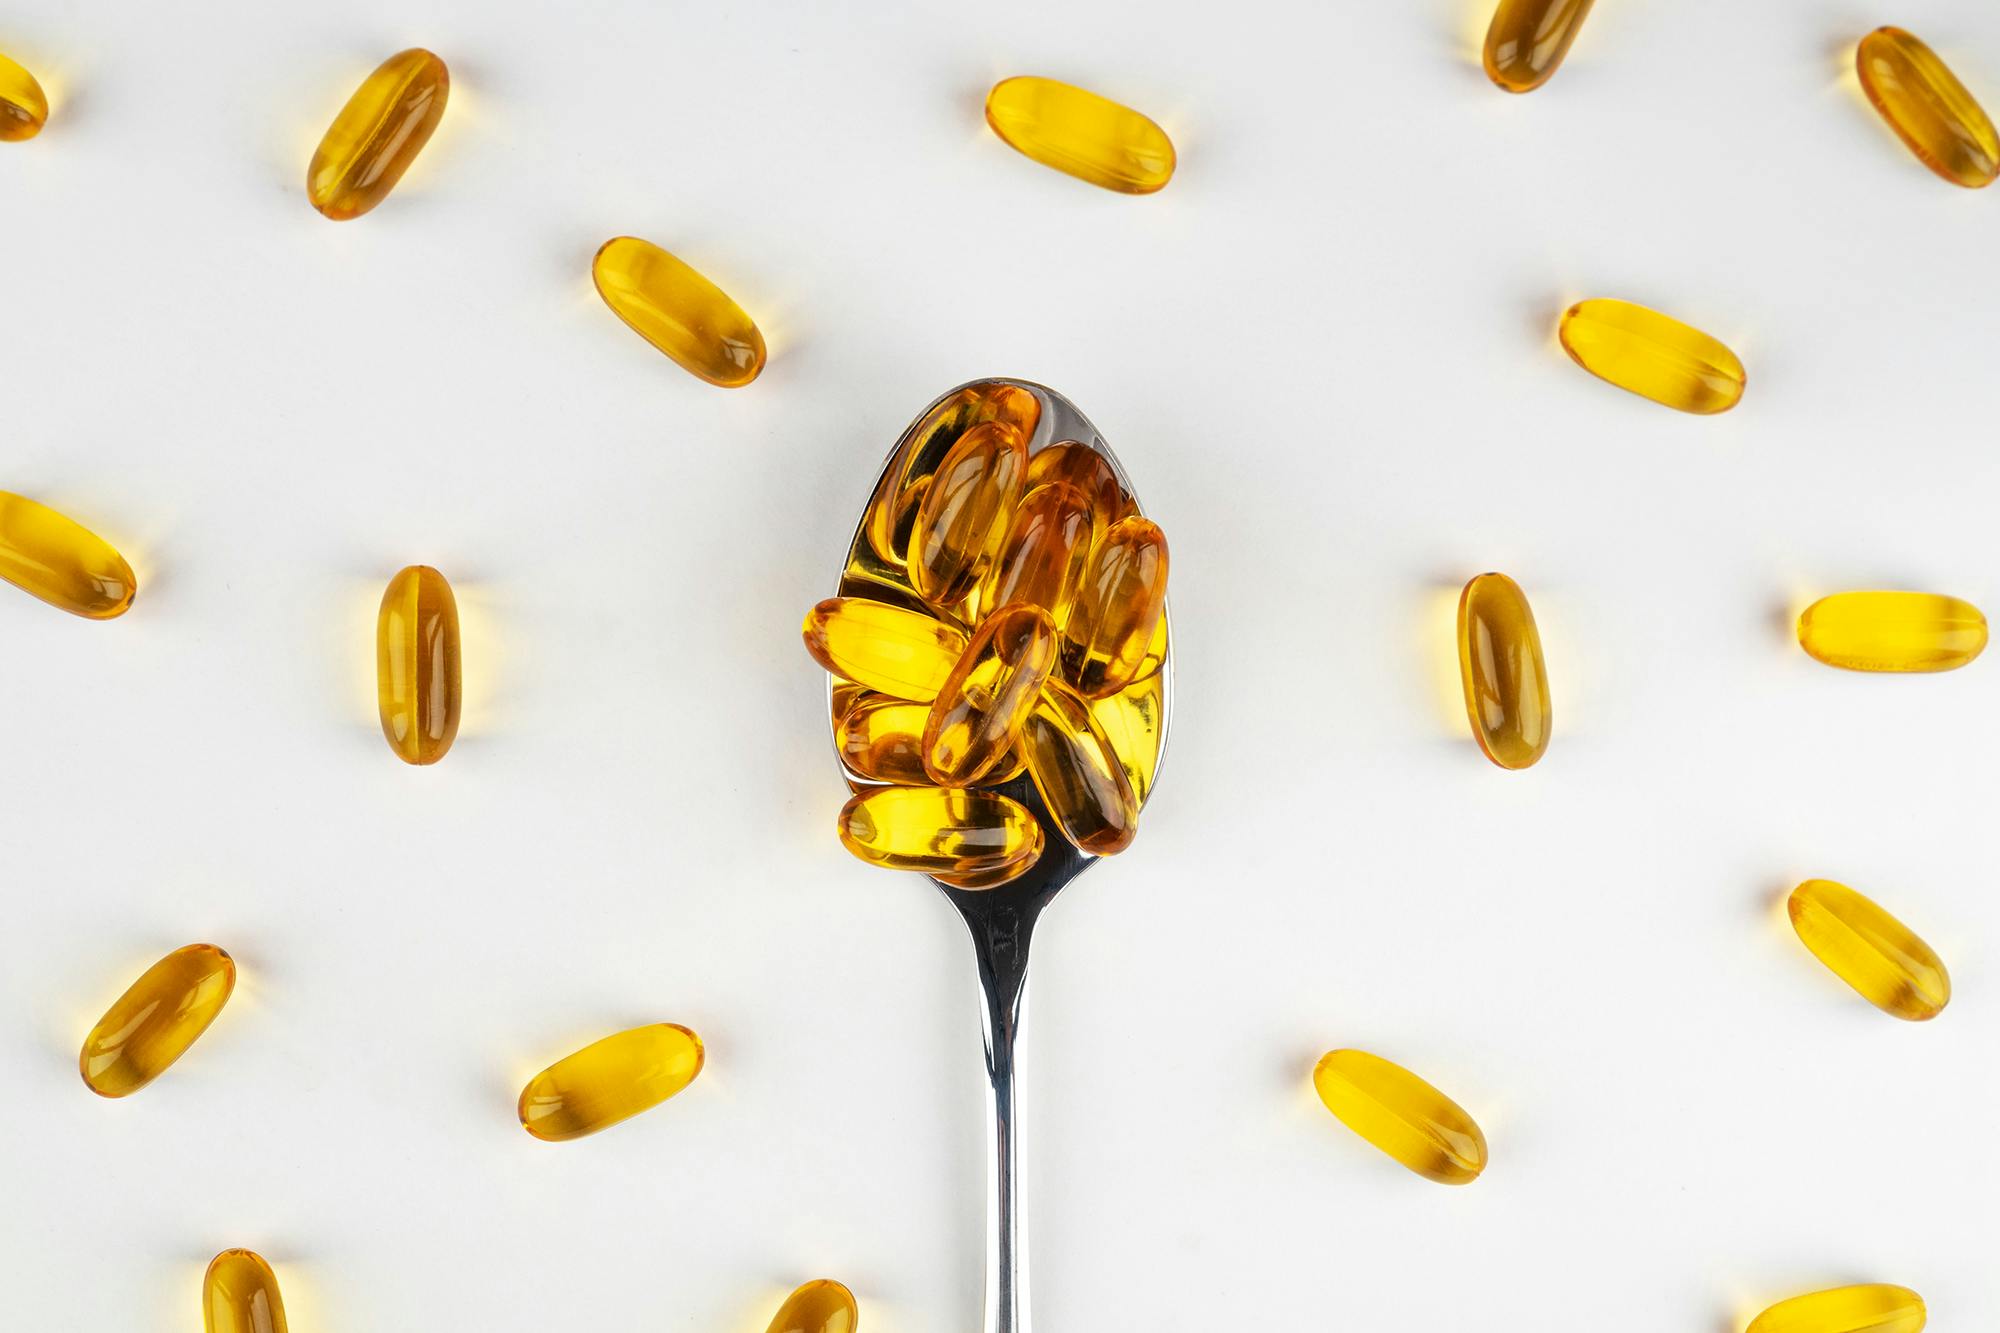 Omega 3 fish oil capsules on a spoon on a light background